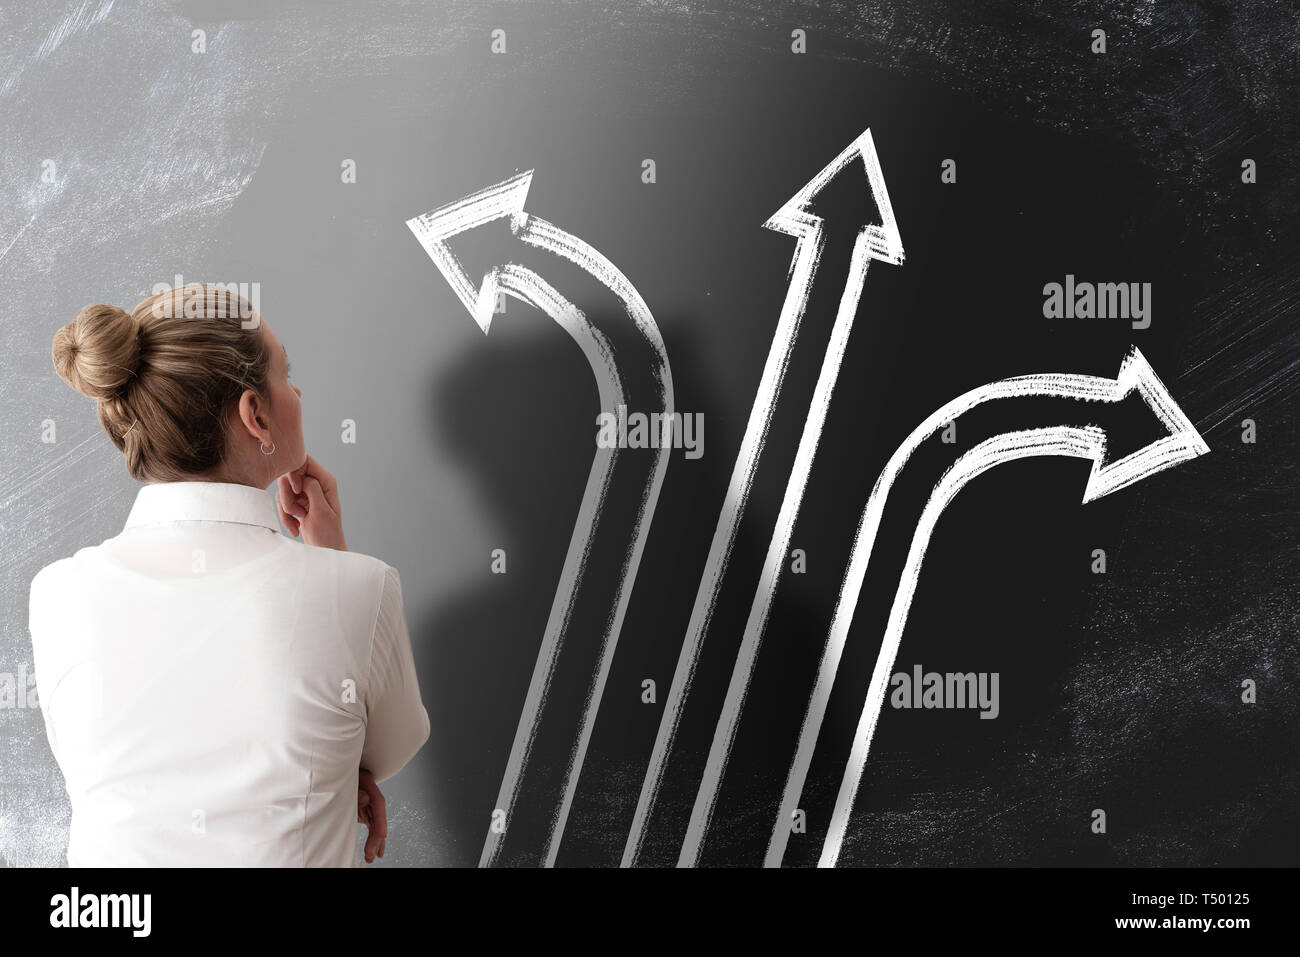 taking the right way and making decisions concept with rear view of woman looking at chalkboard with arrows pointing in different directions Stock Photo